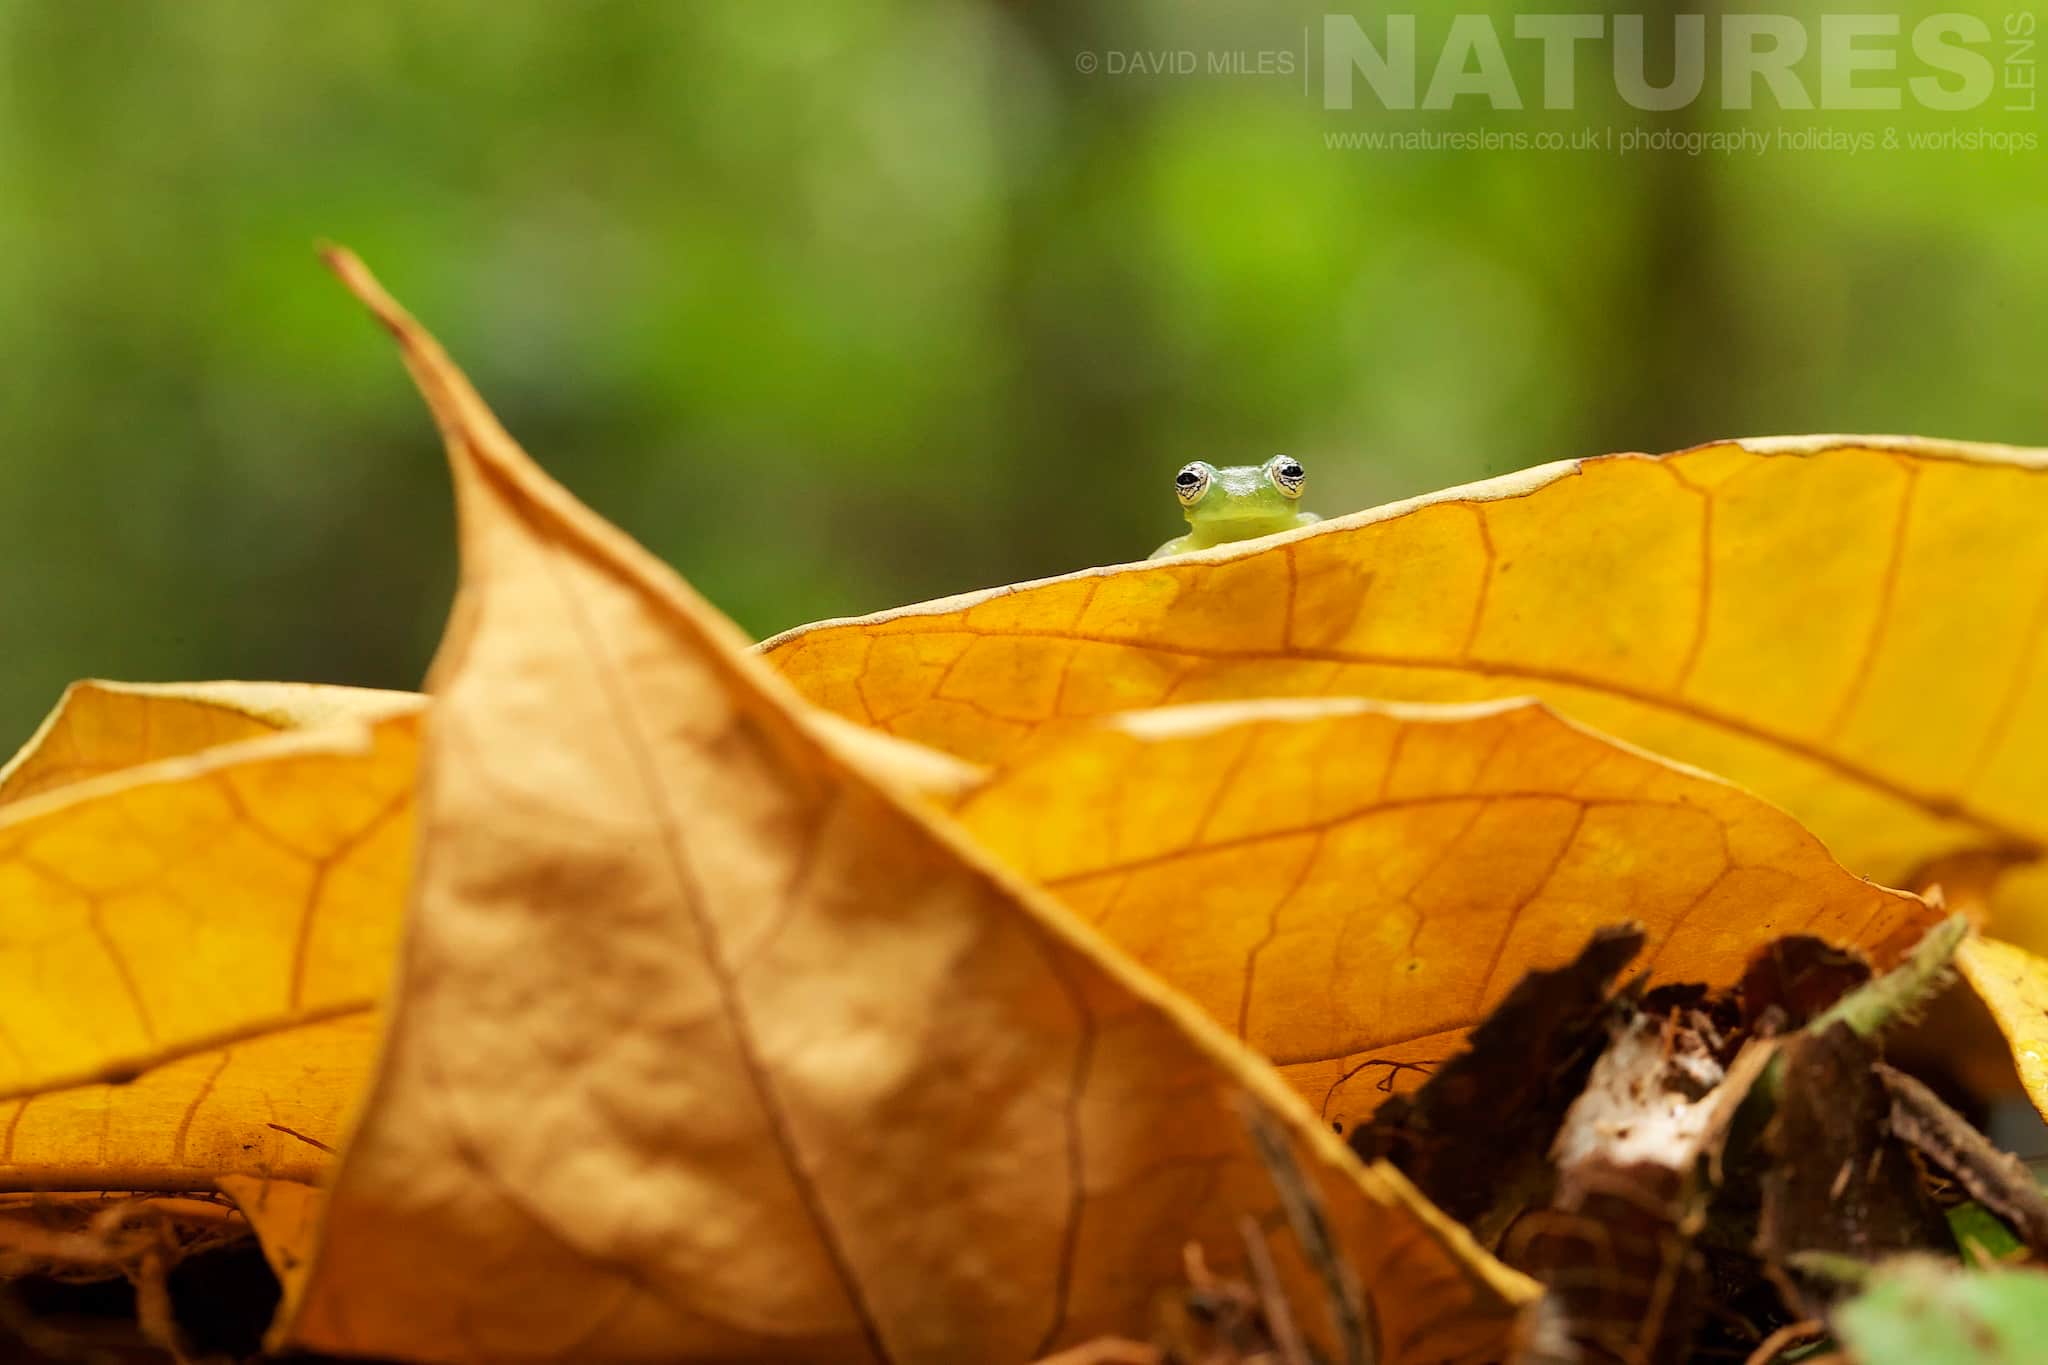 A Ghost Glass Frog Peering Over A Yellow Leaf Typical Of The Kind Of Image We Hope You Will Capture During Our Costa Rican Wildlife Photography Holiday